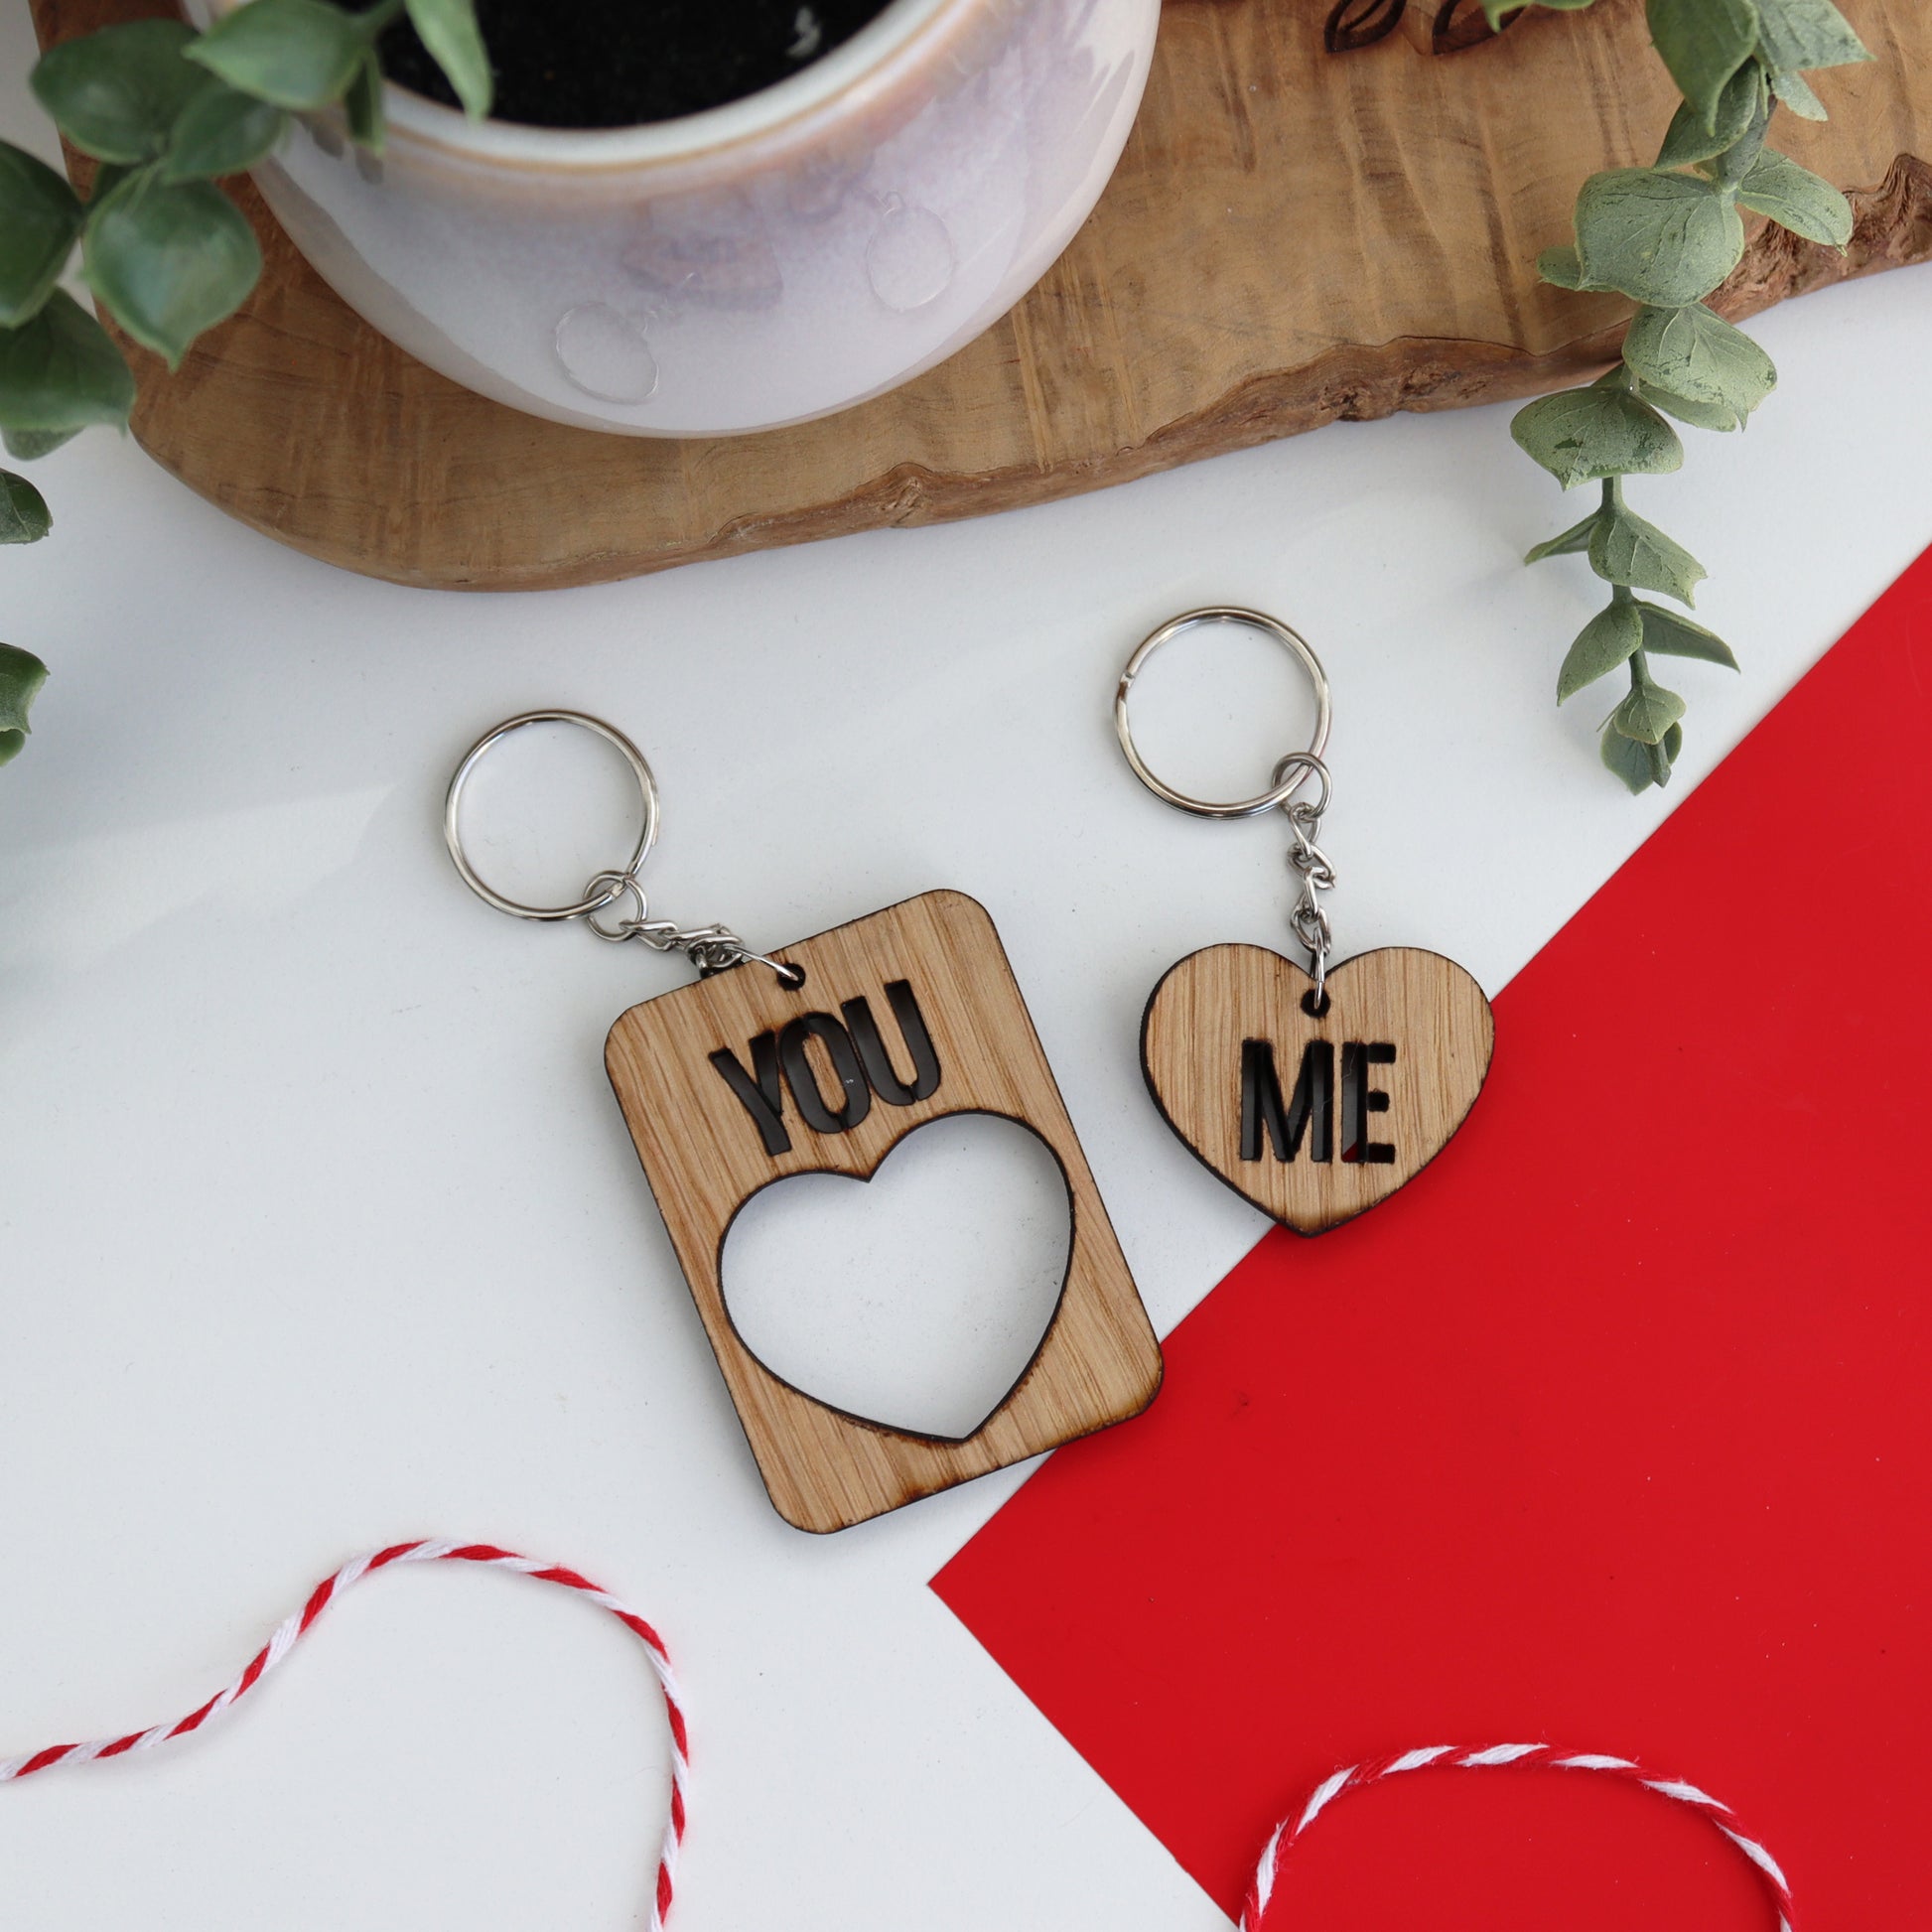 wooden keyring set large keyring has you cut out of it and the small heart keyring has Me cut out of it